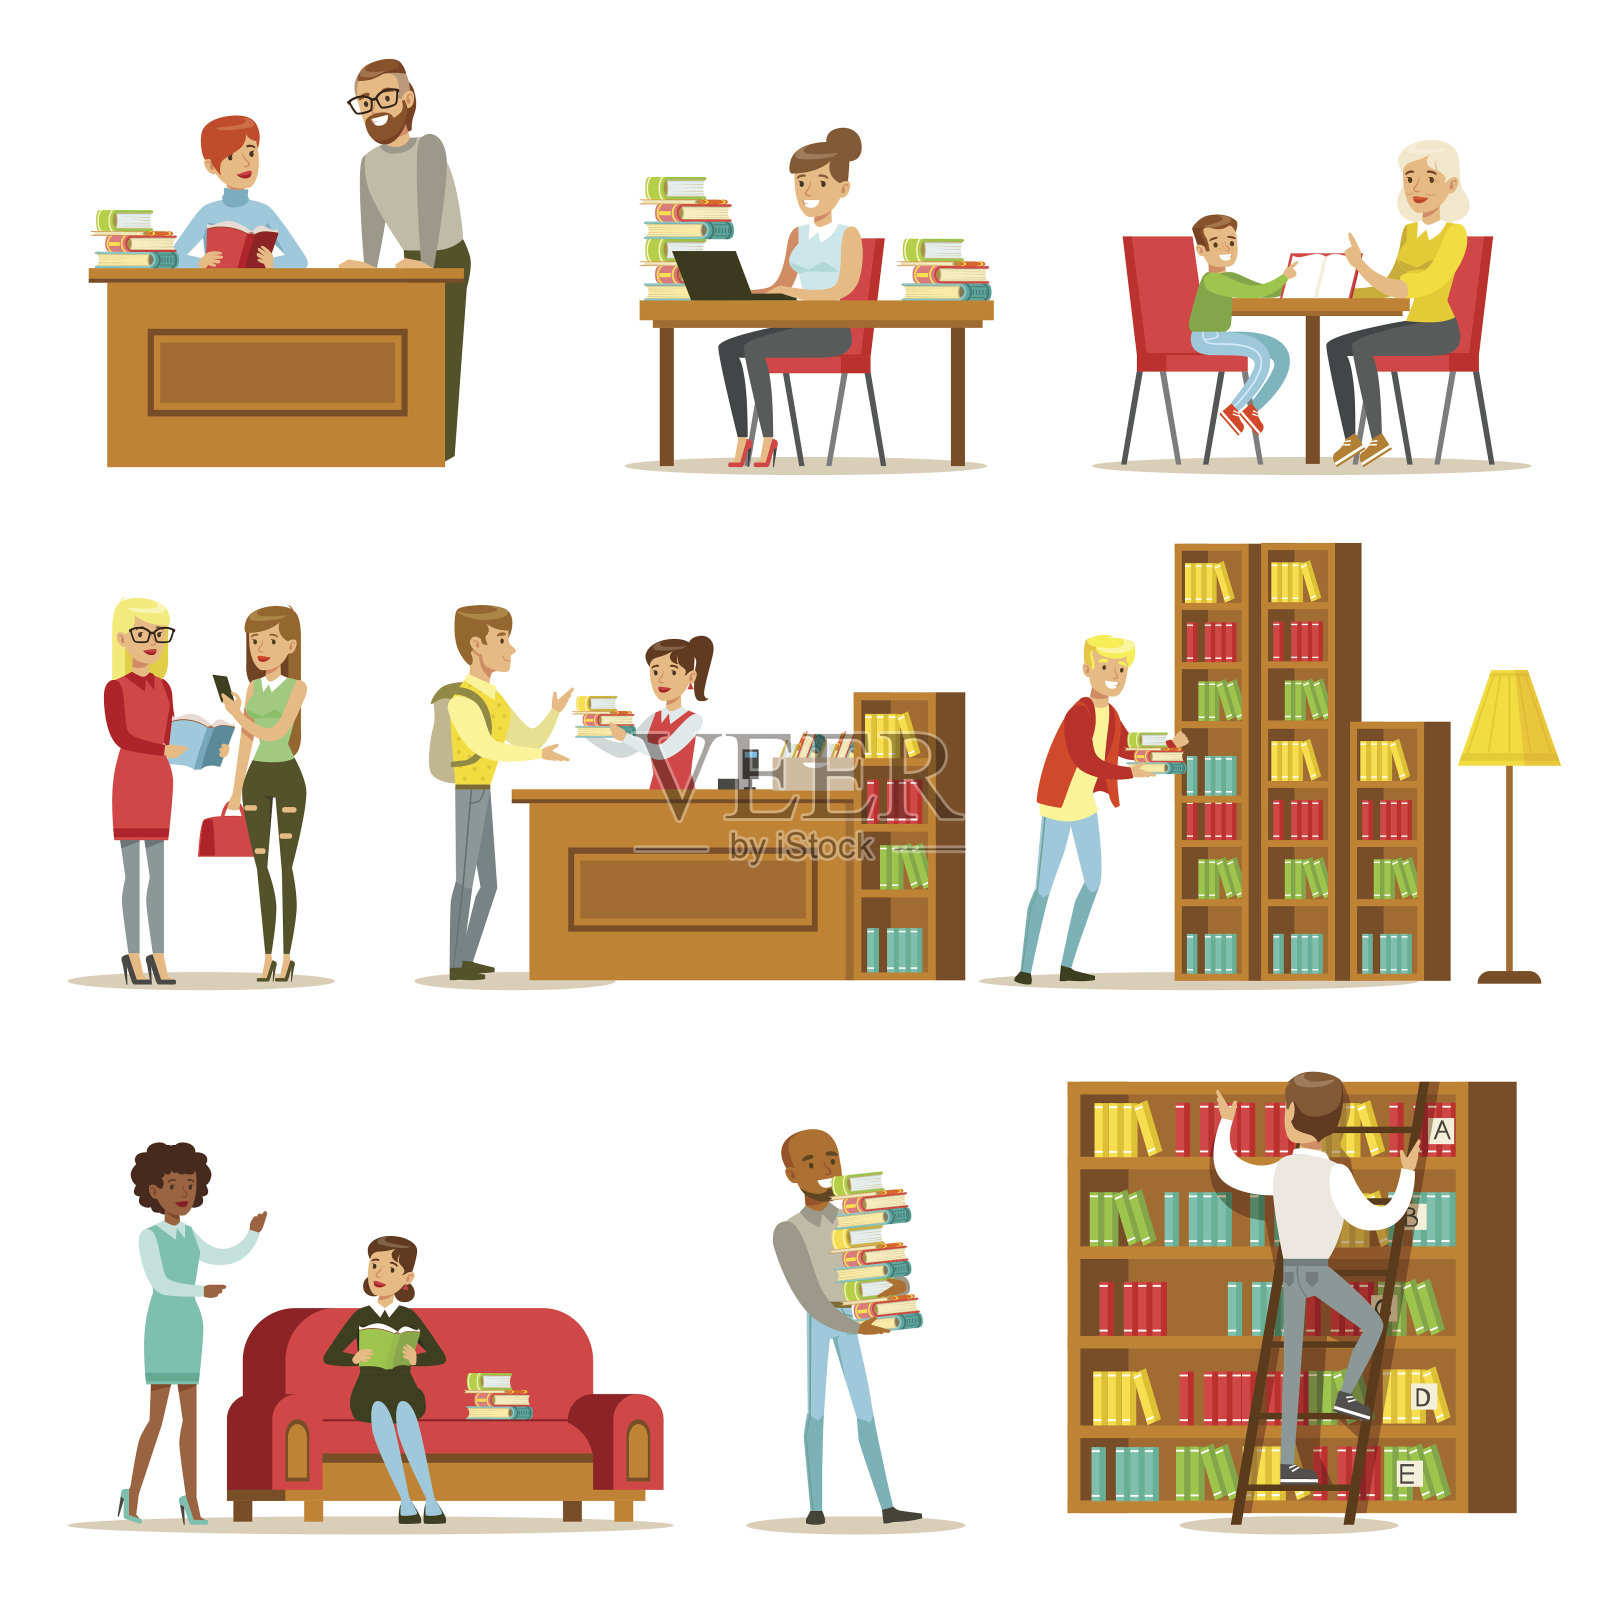 People Talking And Reading Books In Library Set Of插图插画图片素材